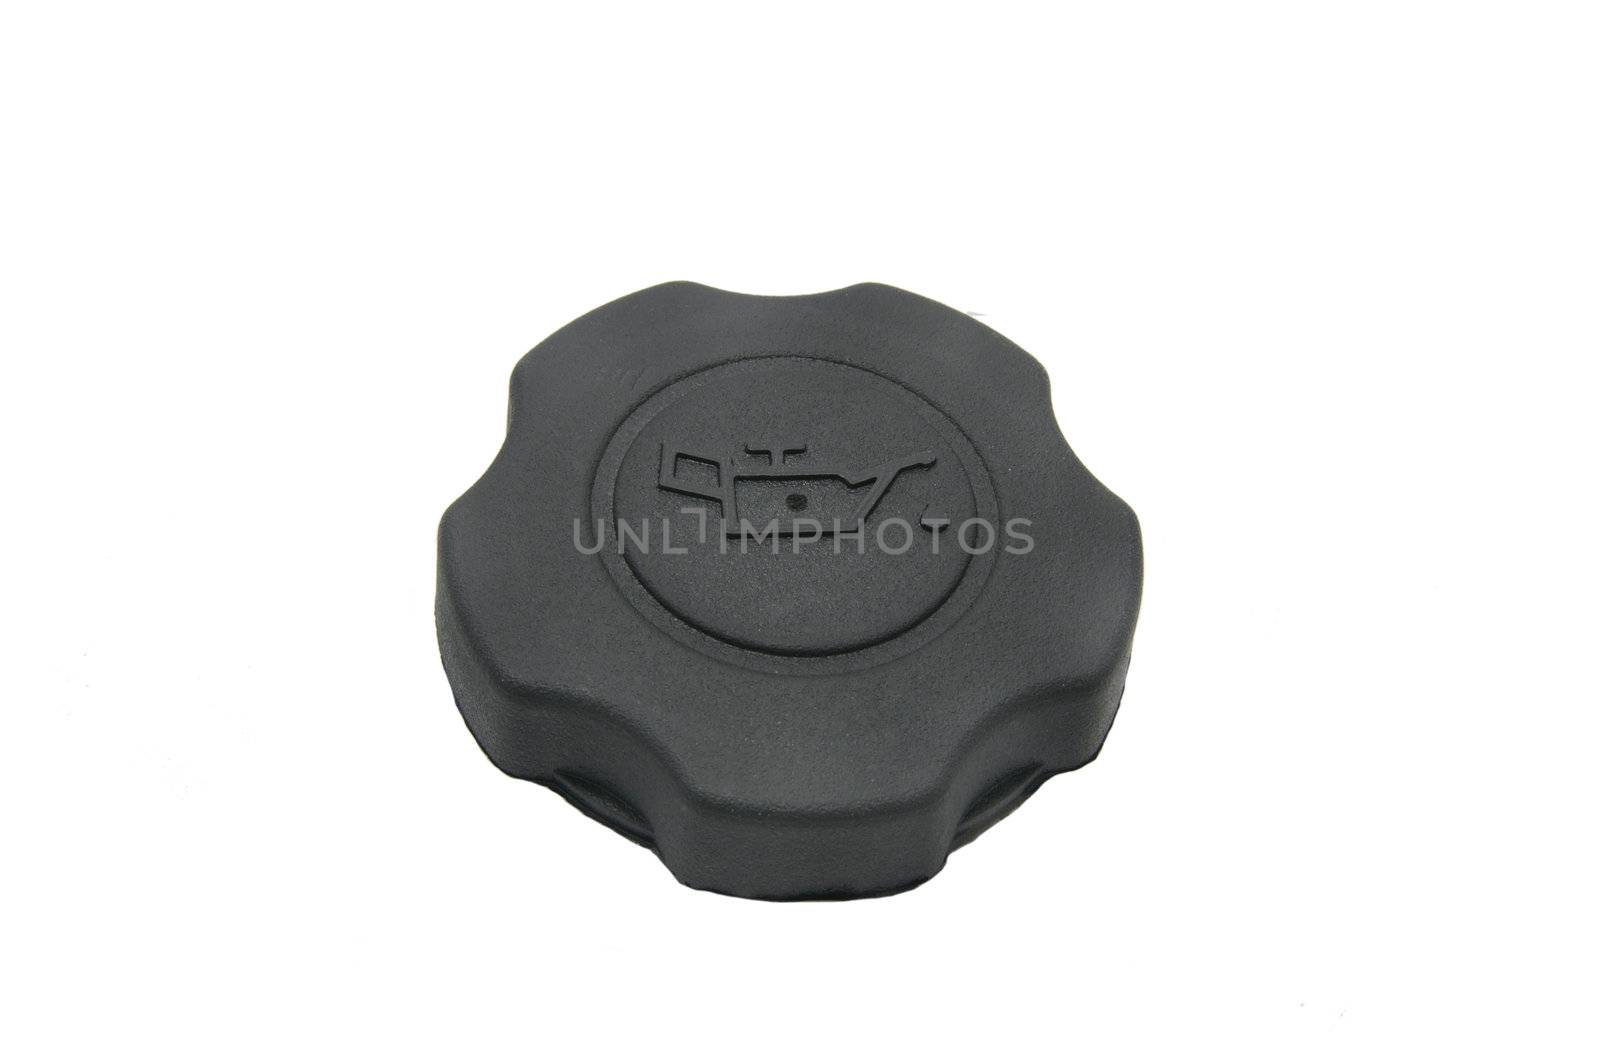 engine oil cap on a white background